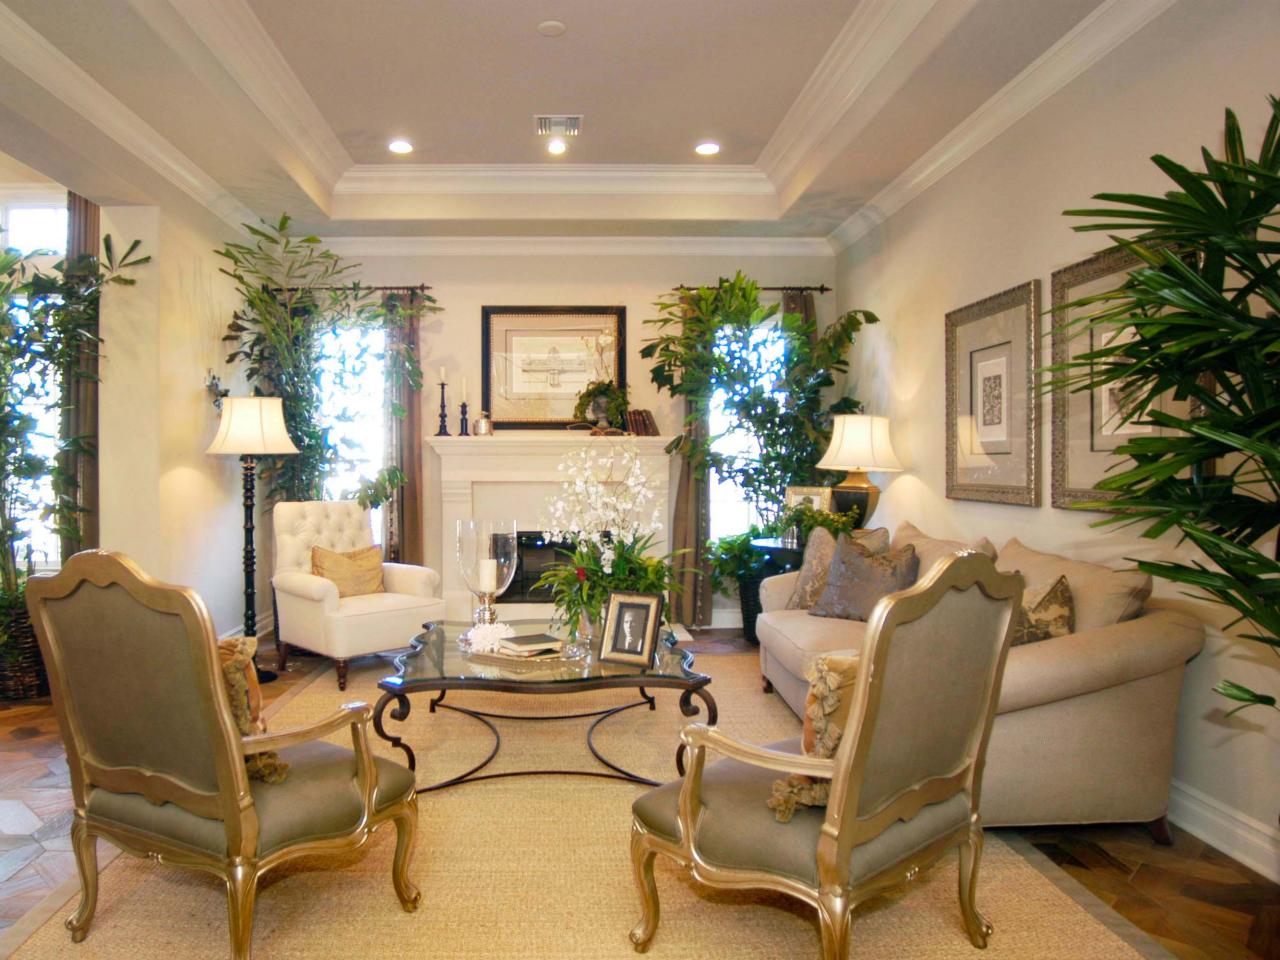 Elegant Living Room with Tray Ceiling | HGTV